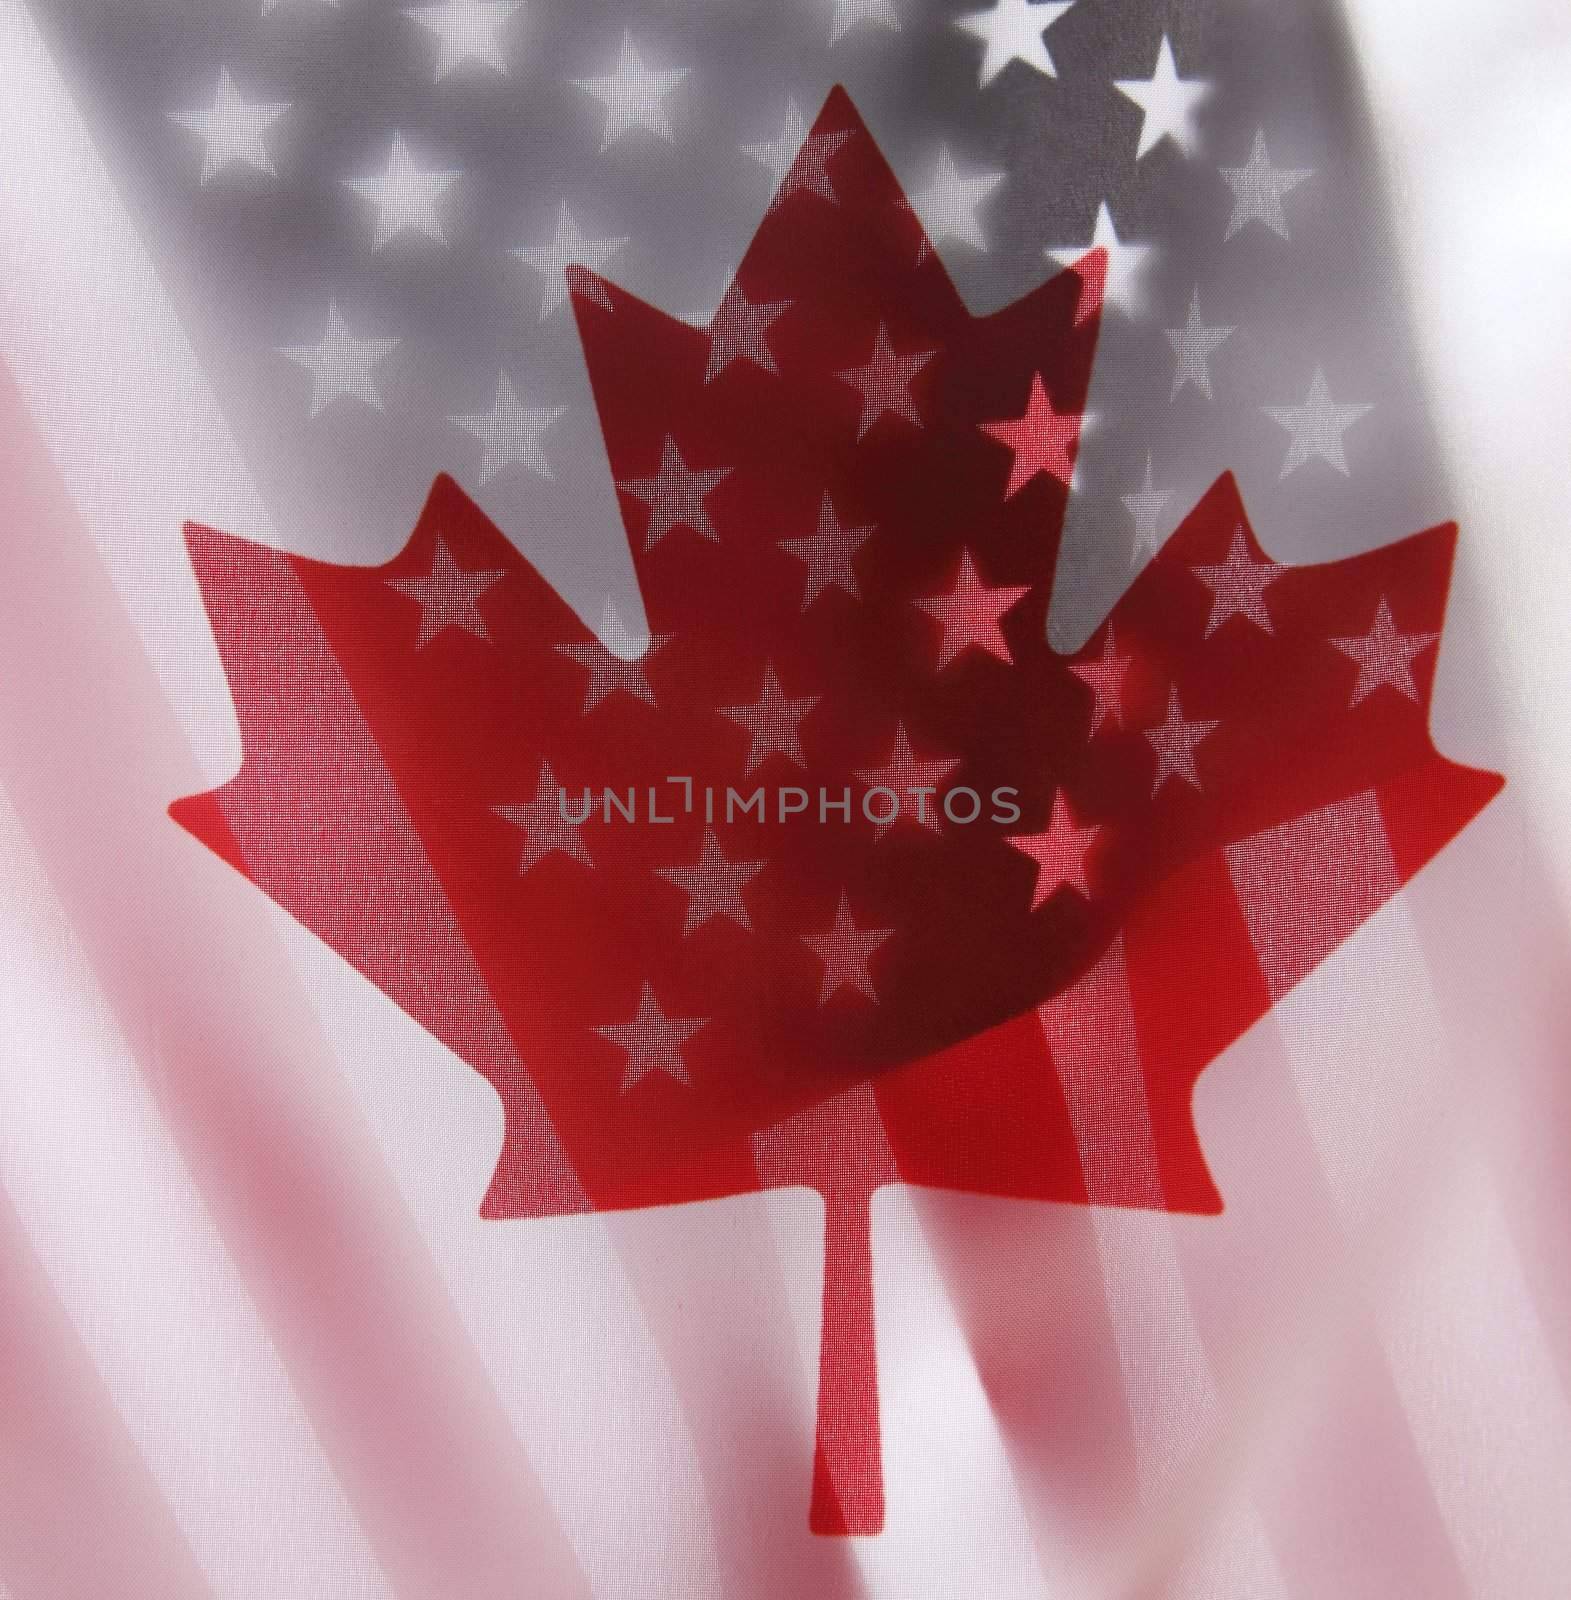 backlit flags of Canada and the USA